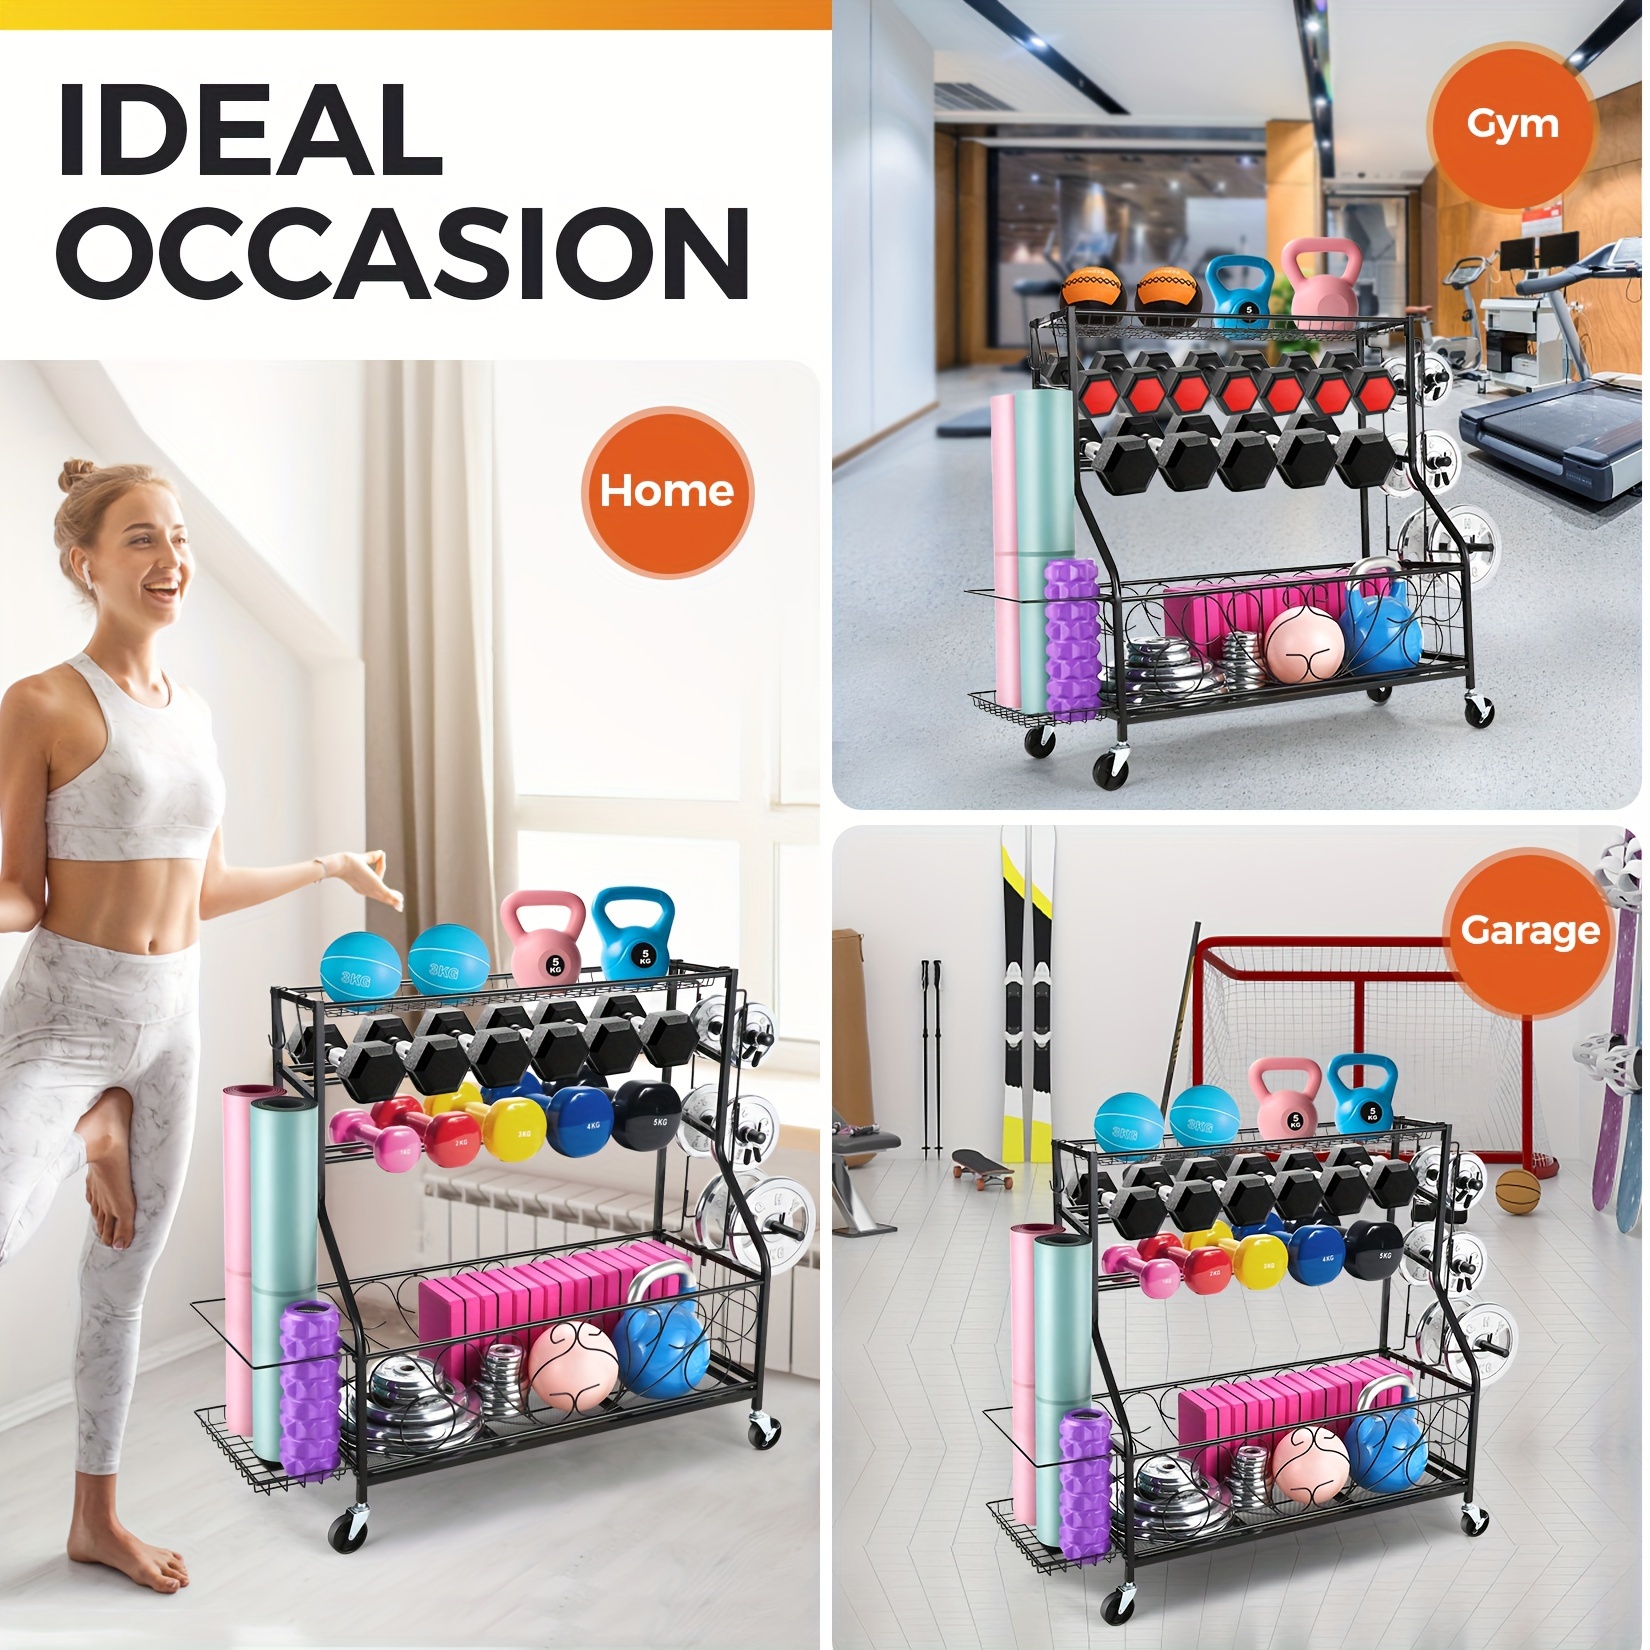 

Weight Rack For Dumbbells, Home Gym Storage For Dumbbells Kettlebells Yoga Mat And Balls, All In 1 Workout Storage With Wheels And Hooks, Powder Coated Finish Steel